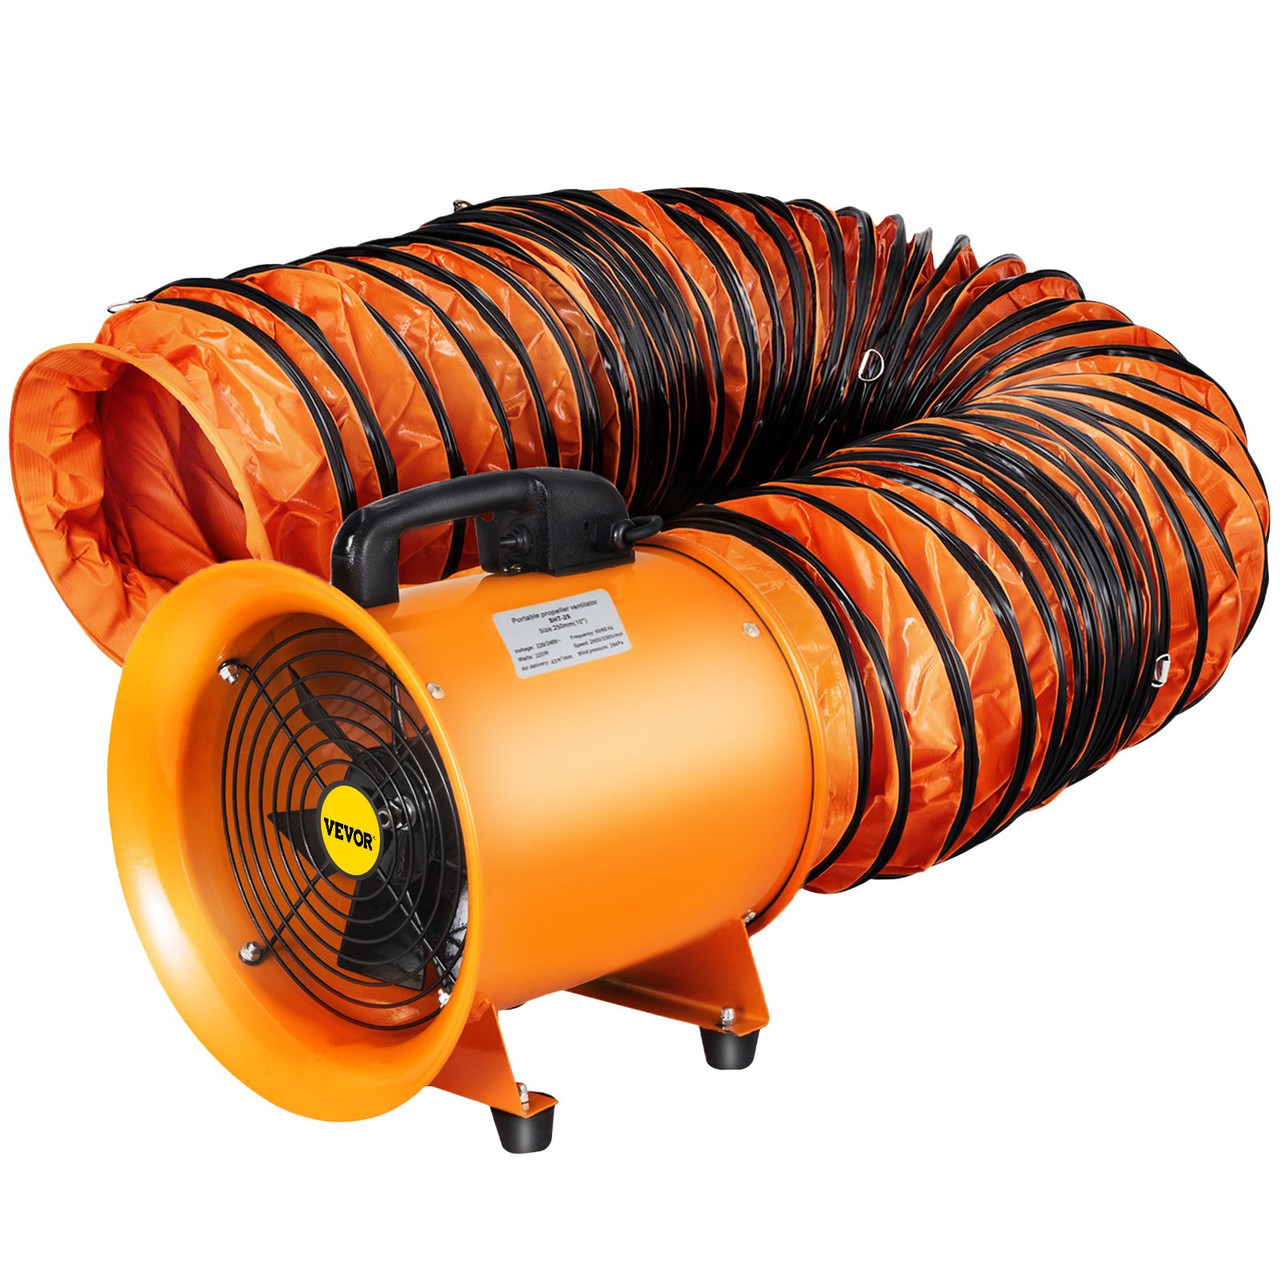 Utility Blower Fan 10 inch with 10M Duct Hose,250MM Portable  Ventilator,0.45HP 1520 CFM